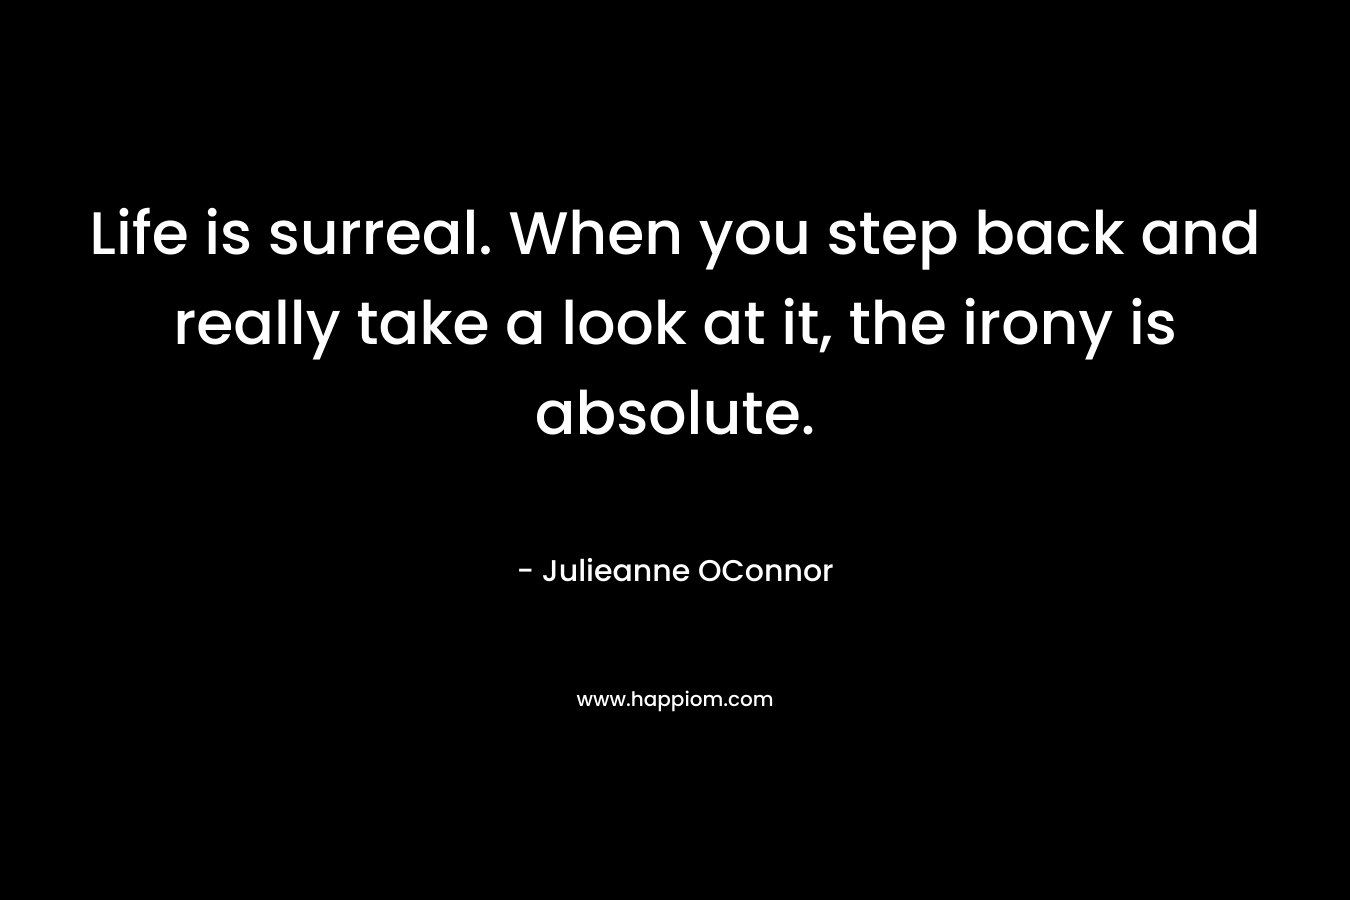 Life is surreal. When you step back and really take a look at it, the irony is absolute. – Julieanne OConnor